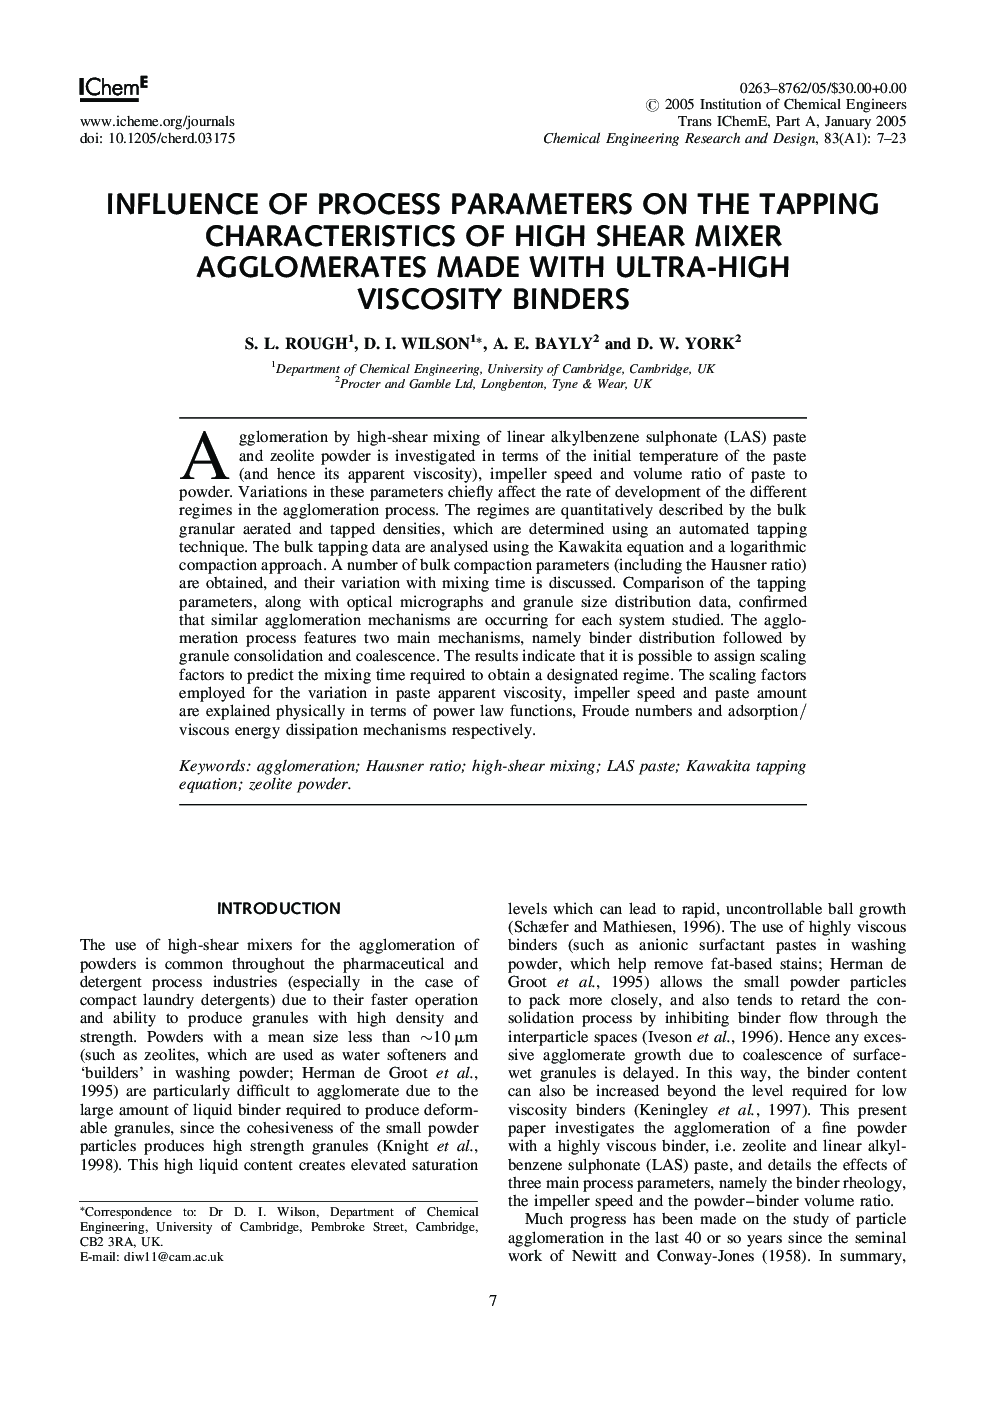 Influence of Process Parameters on the Tapping Characteristics of High Shear Mixer Agglomerates Made with Ultra-High Viscosity Binders